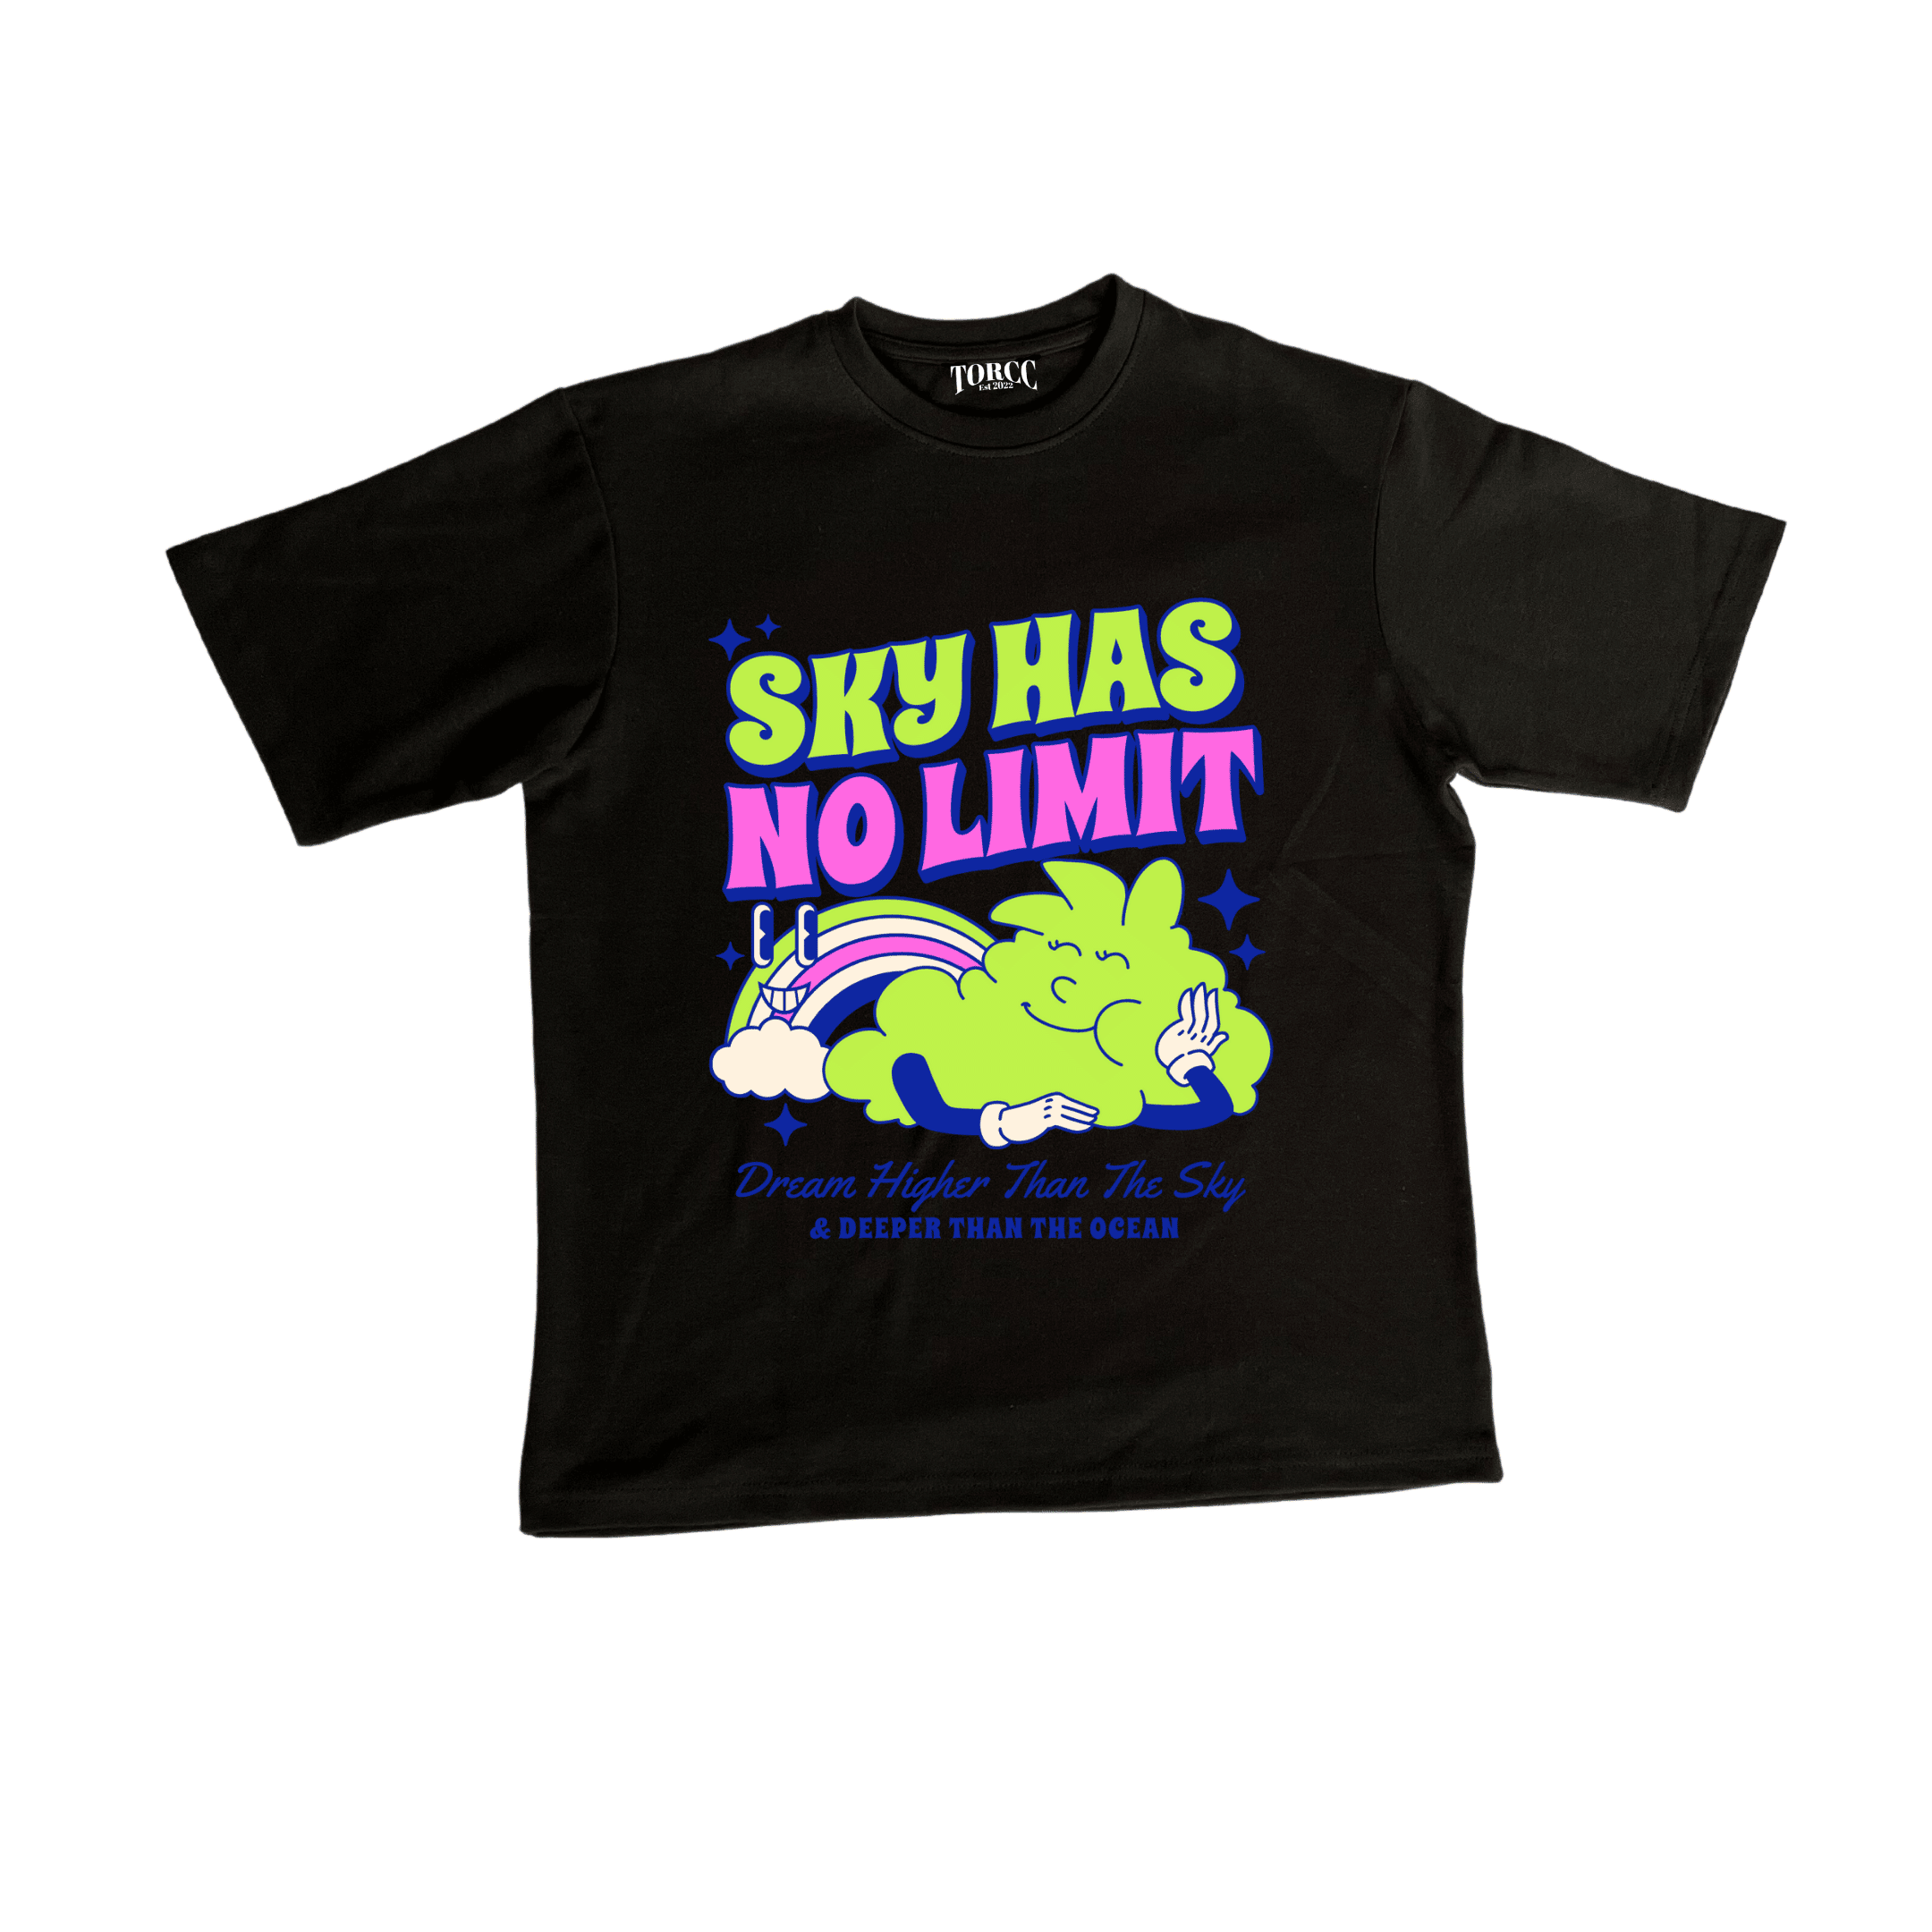 Sky Has No Limit: Oversized Graphic Tees